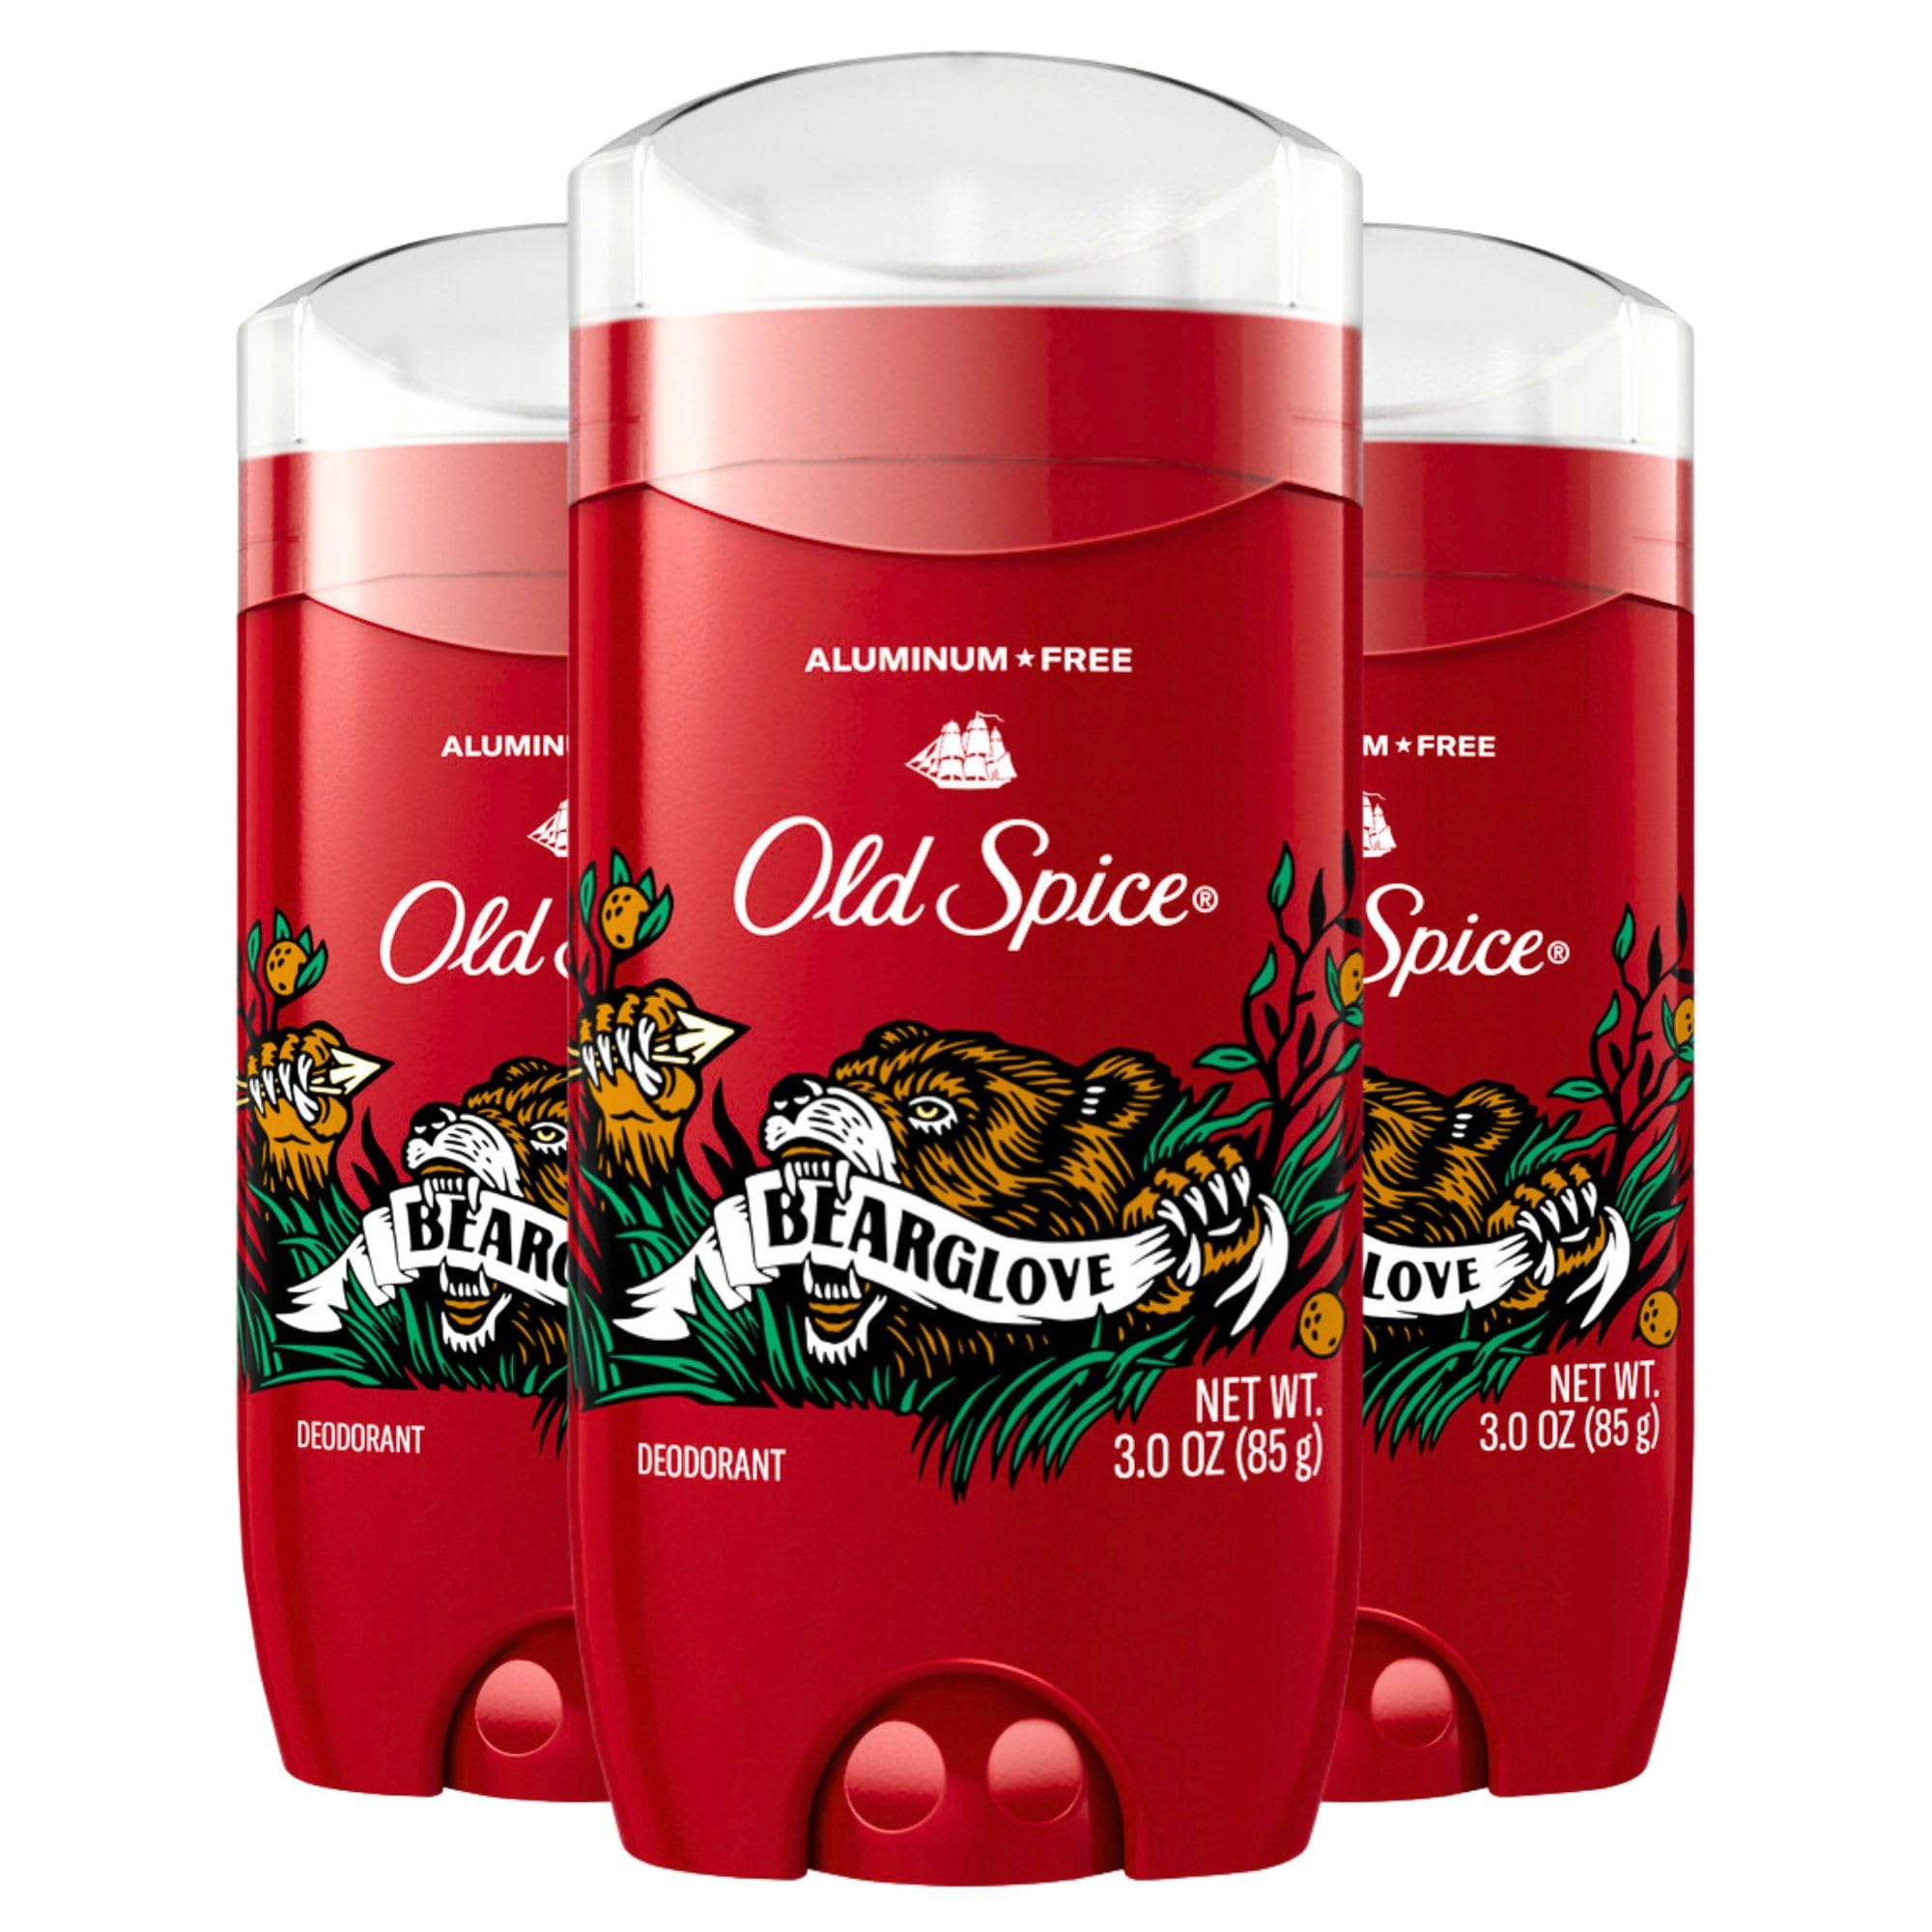 Old Spice Aluminum Free Deodorant for Men, Bearglove, 48 Hr. Protection, 3.0 oz